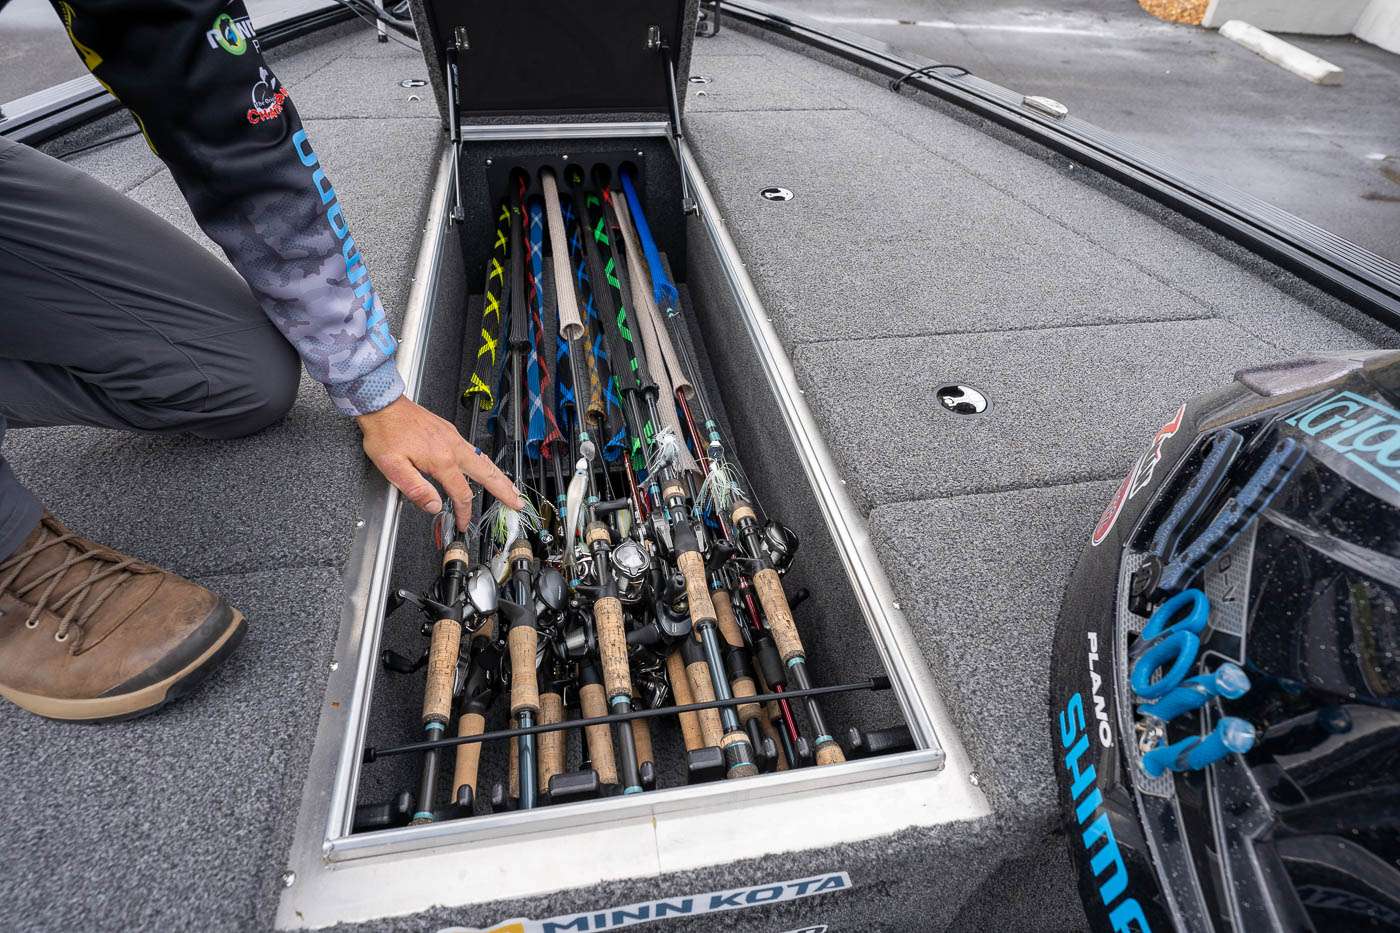 Here's the rod locker. He can carry more than 20 rods in here. 